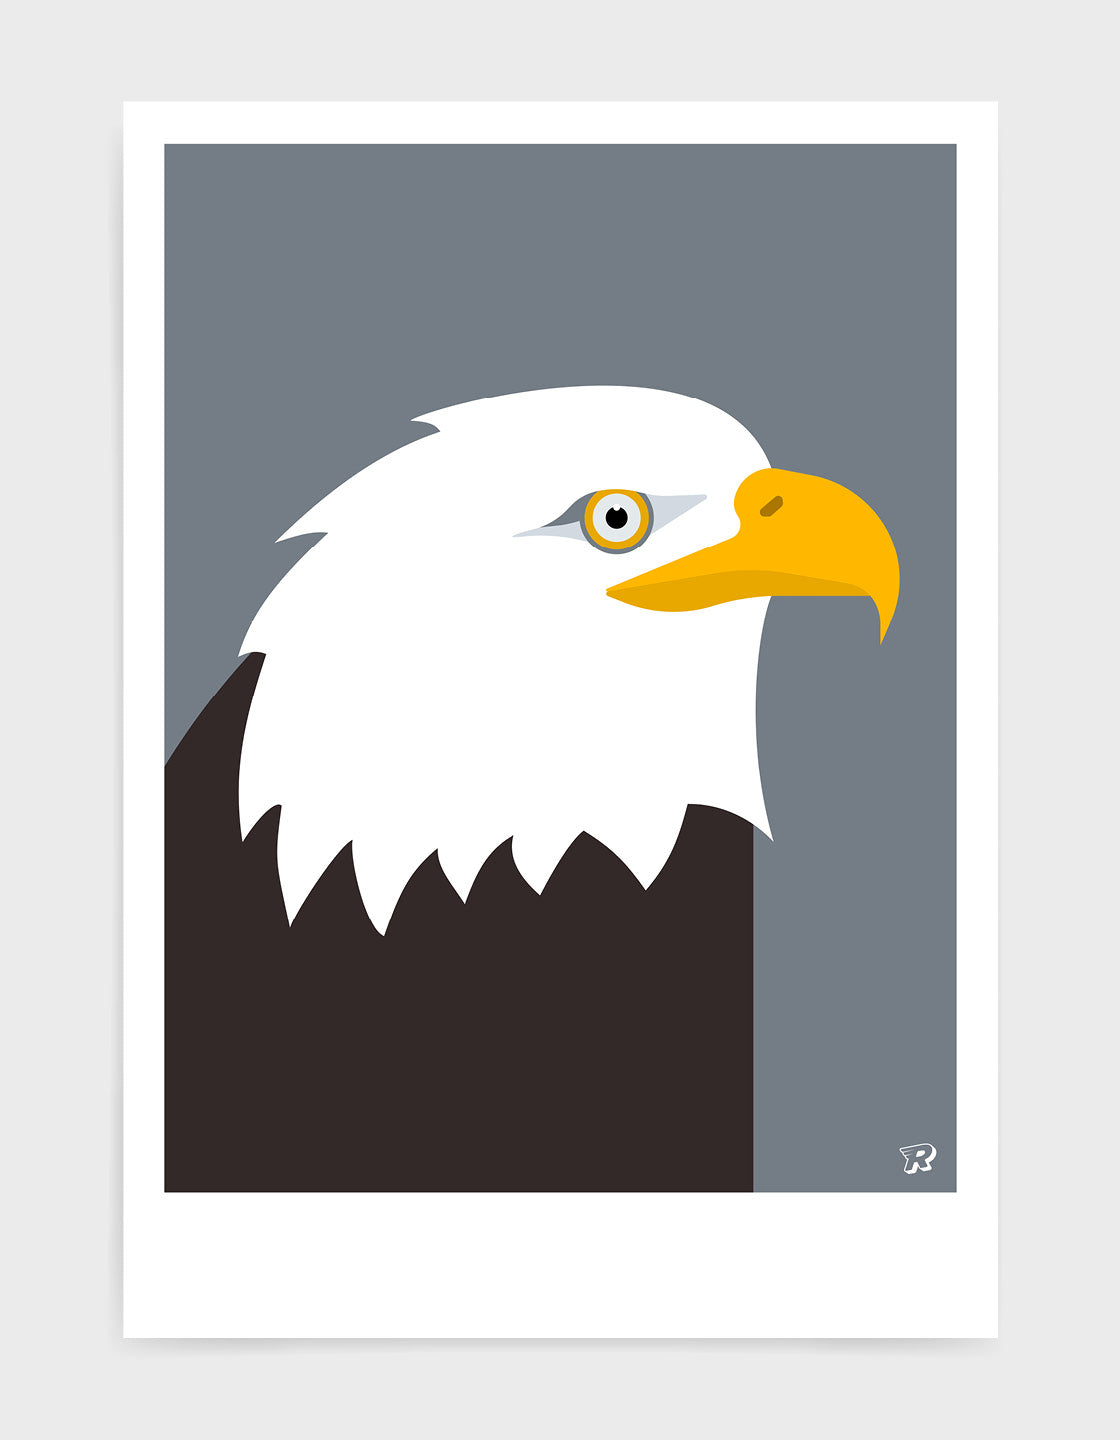 art print of an American bald eagle in profile against a dark grey background